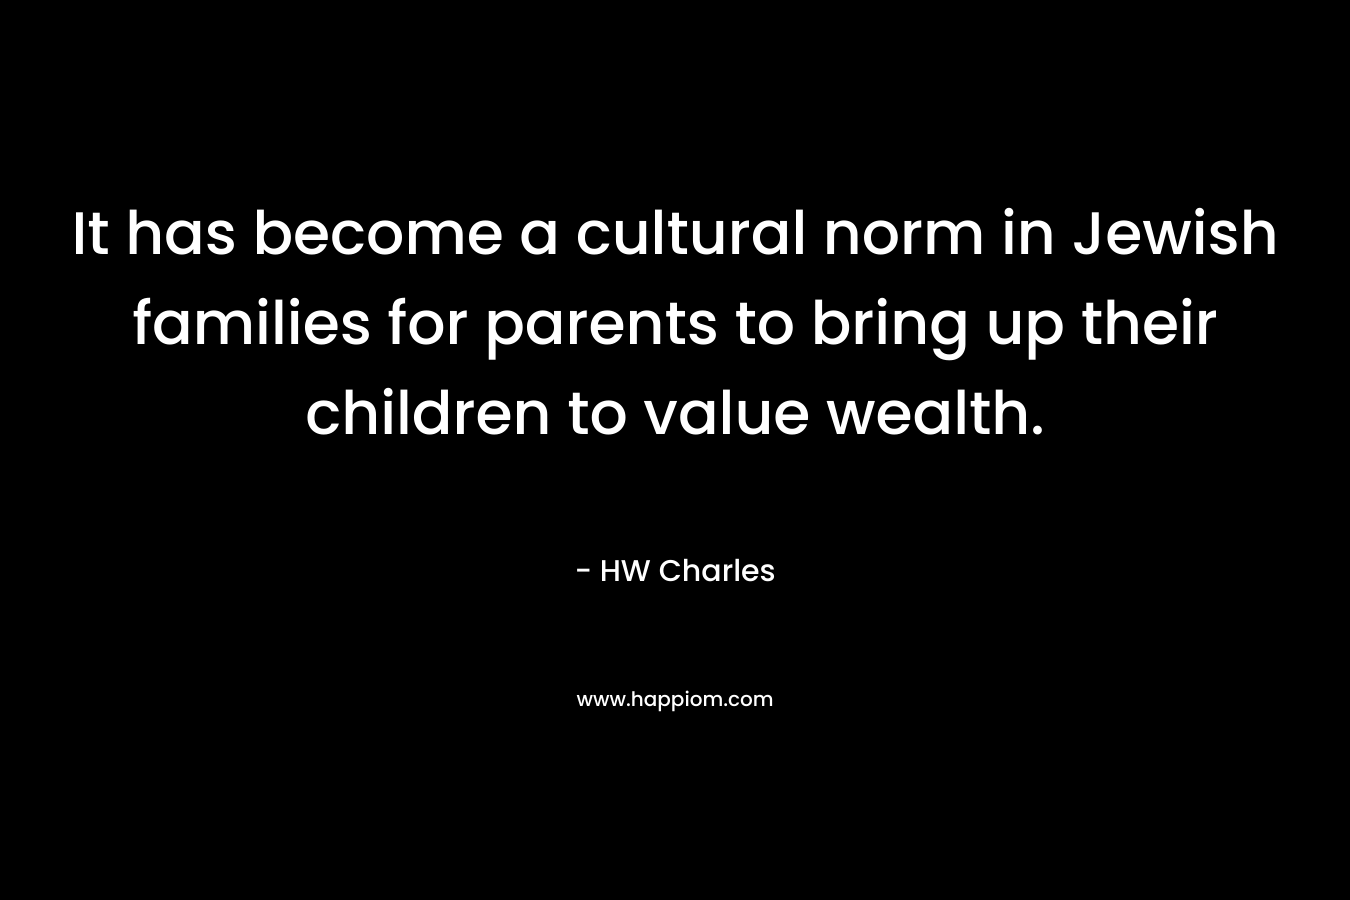 It has become a cultural norm in Jewish families for parents to bring up their children to value wealth. – HW Charles